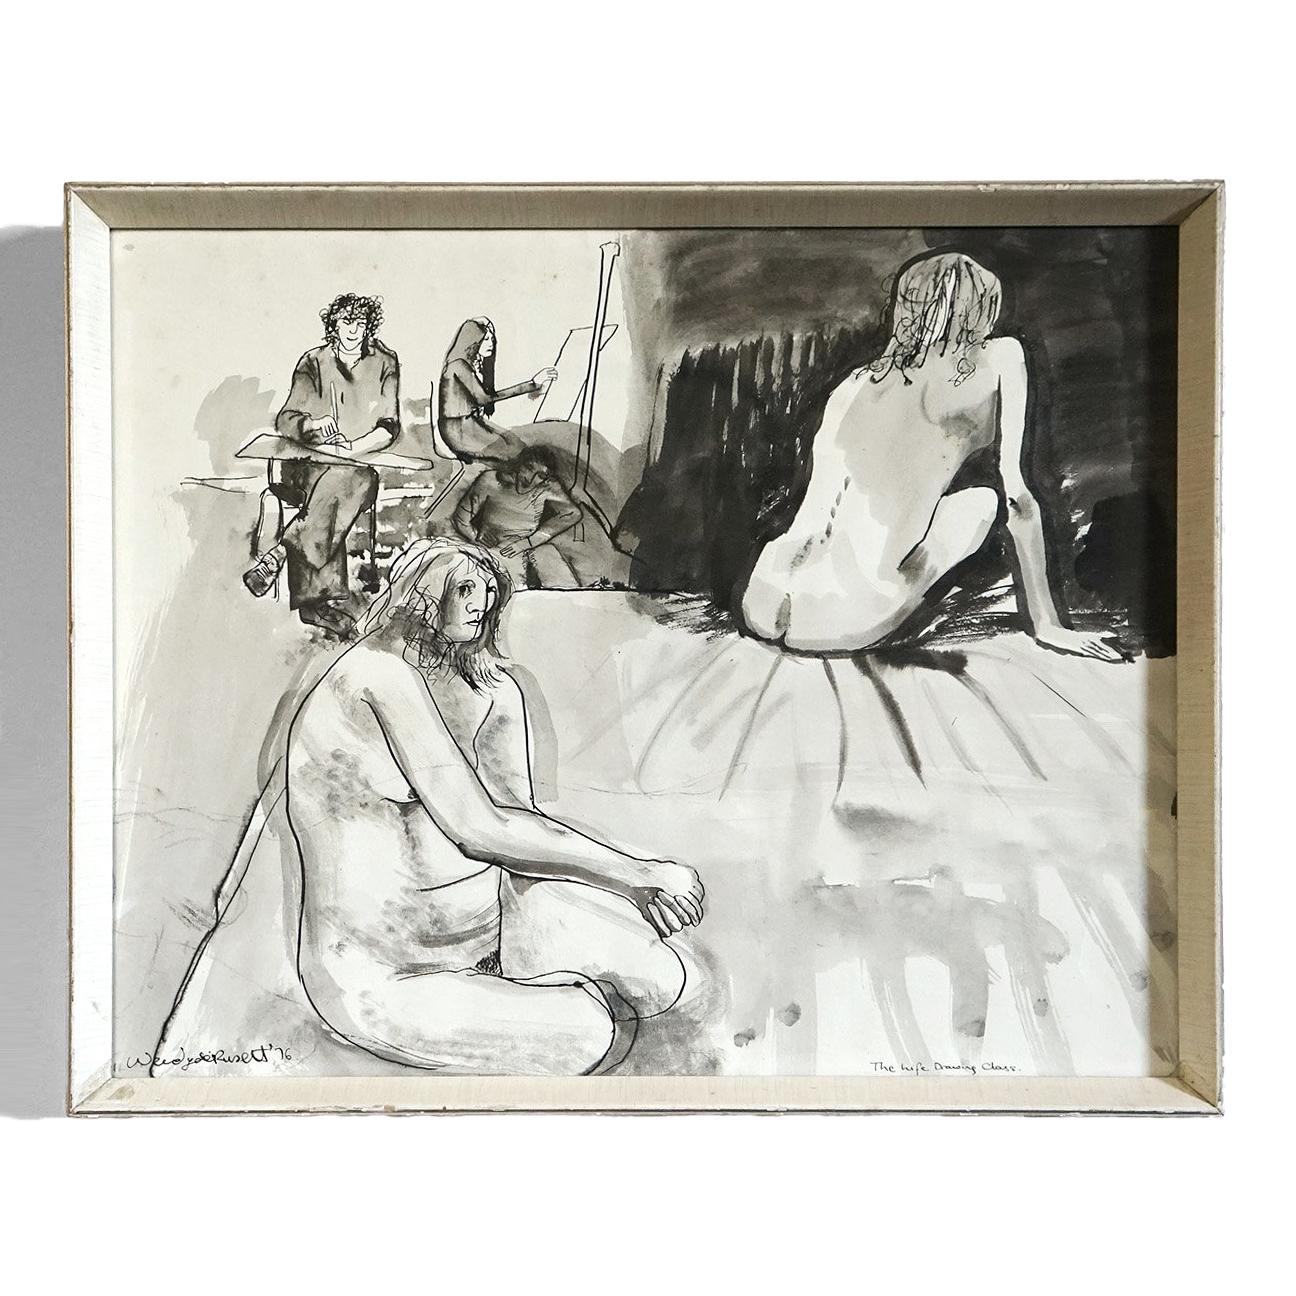 Vintage Original Drawing Depicting a Life Drawing Class

An accomplished work that successfully brings out the character of both the sitters and artists in a life drawing class.

Executed in a free and confident style matching scratchy, sketchy pen